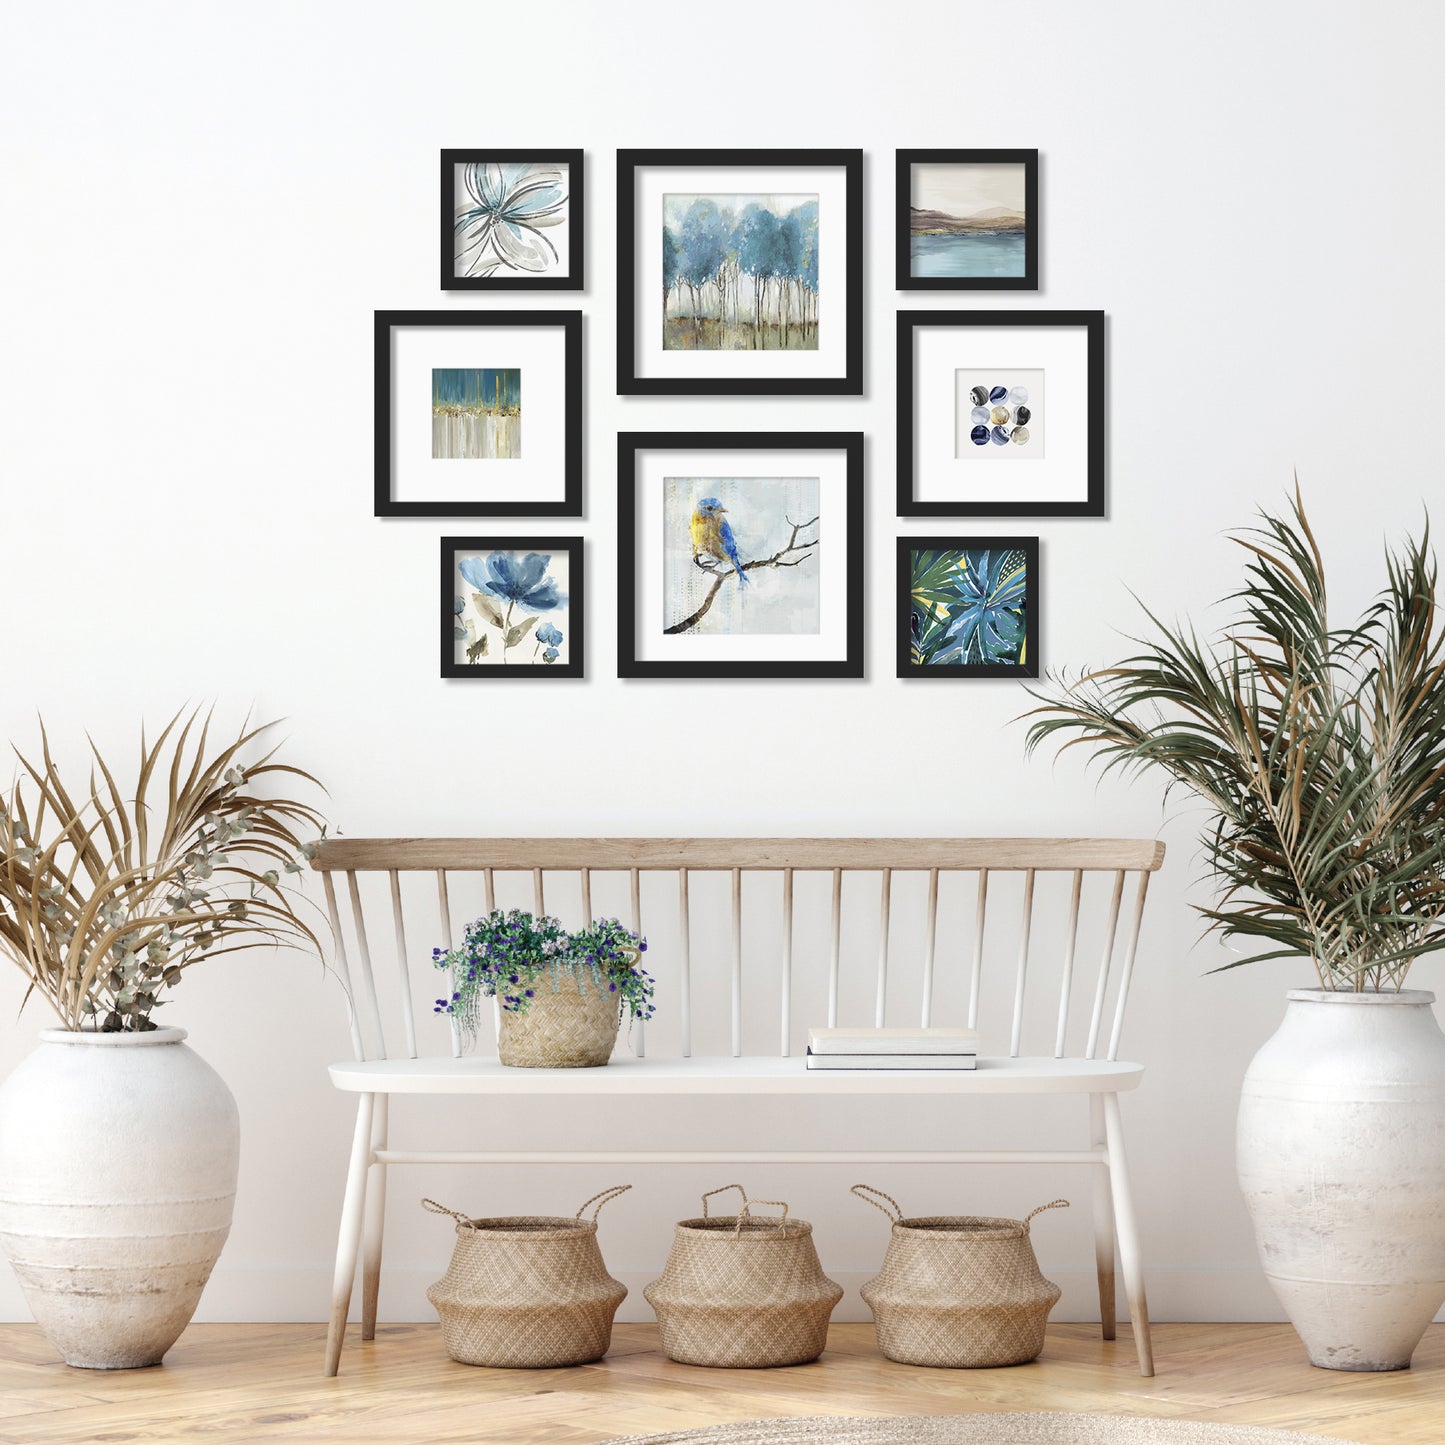  White Picture Frame Set - 8 pcs Gallery Wall Set of